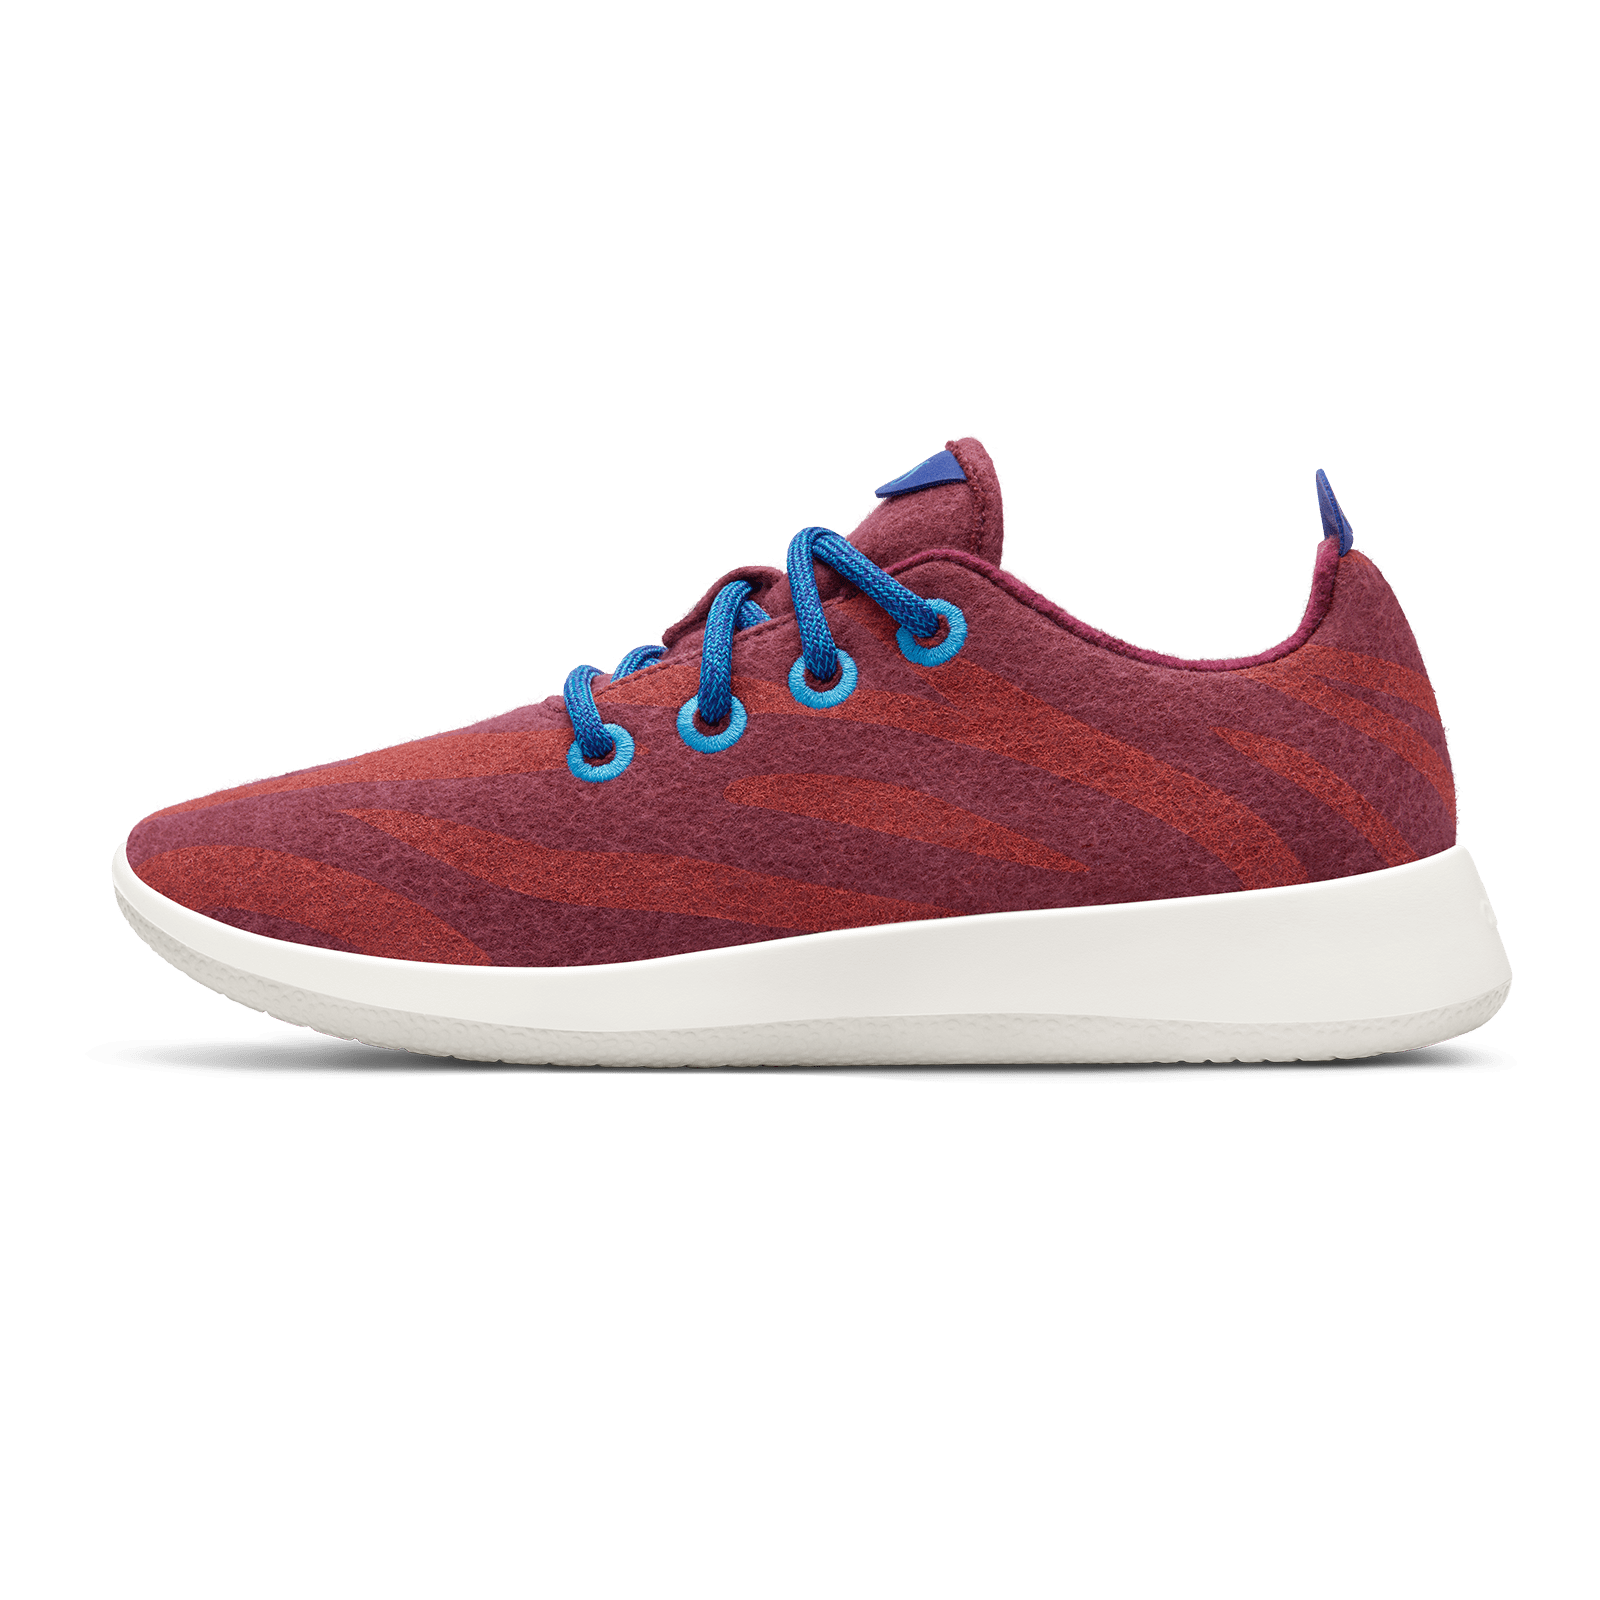 AB0047M SHOE LEFT GLOBAL MENS WOOL RUNNER CHINESE NEW YEAR